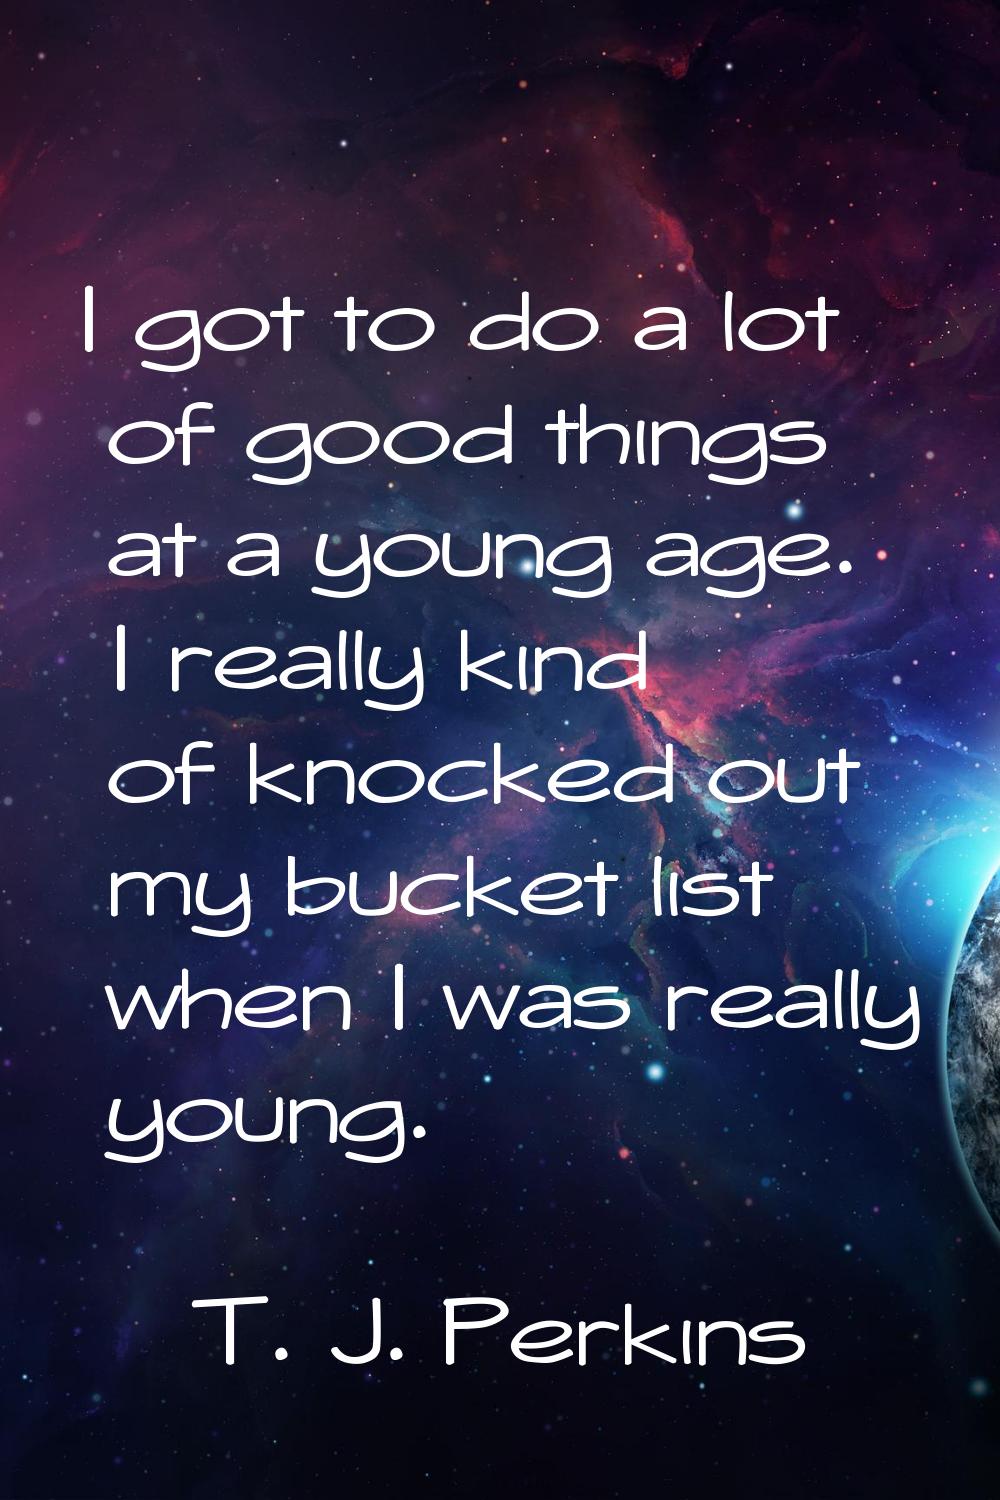 I got to do a lot of good things at a young age. I really kind of knocked out my bucket list when I